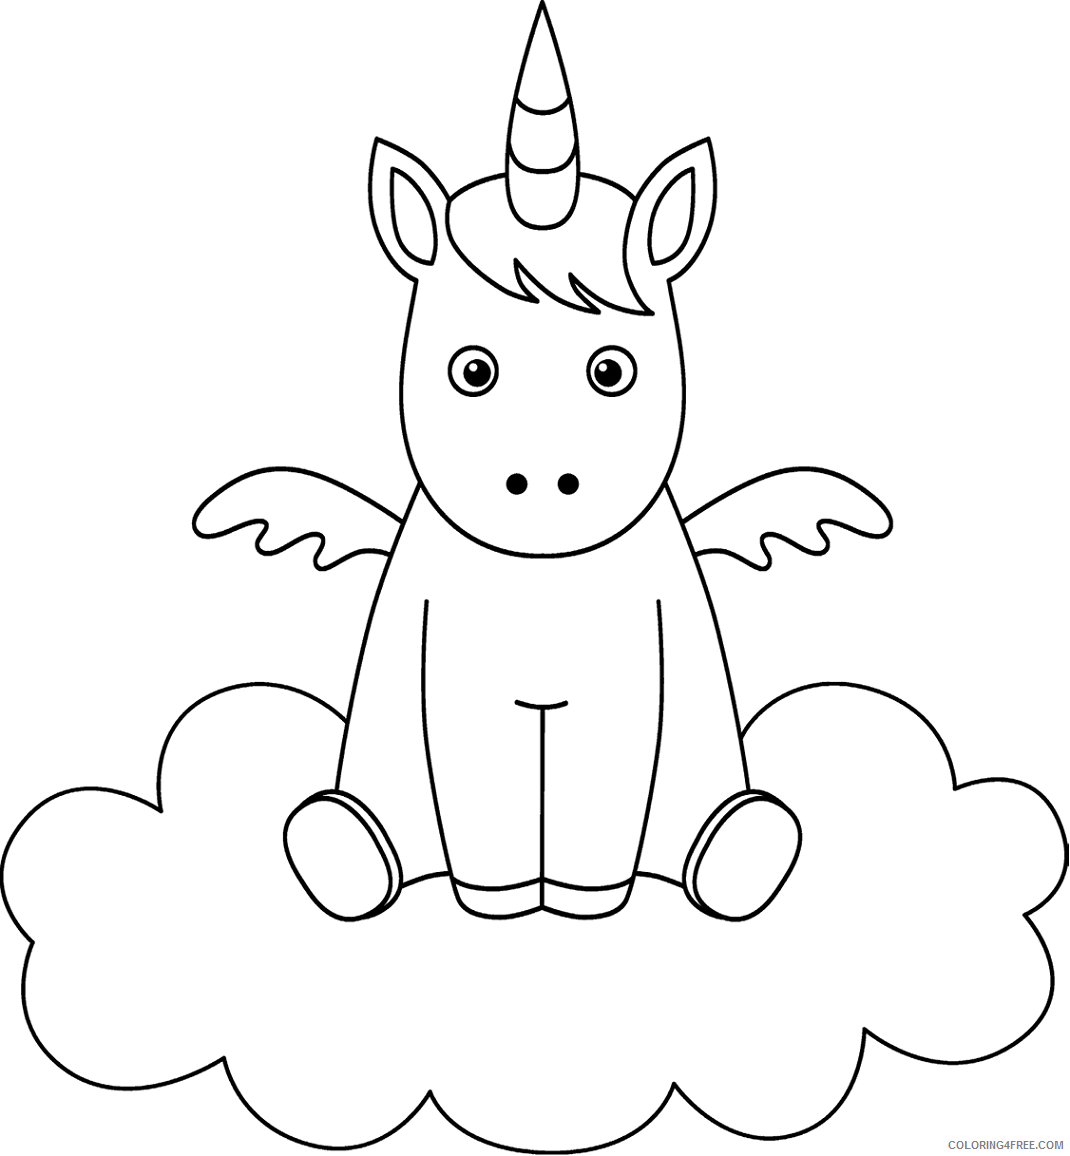 Cloud Coloring Pages little_unicorn_on_cloud a4 Printable 2021 1701 Coloring4free